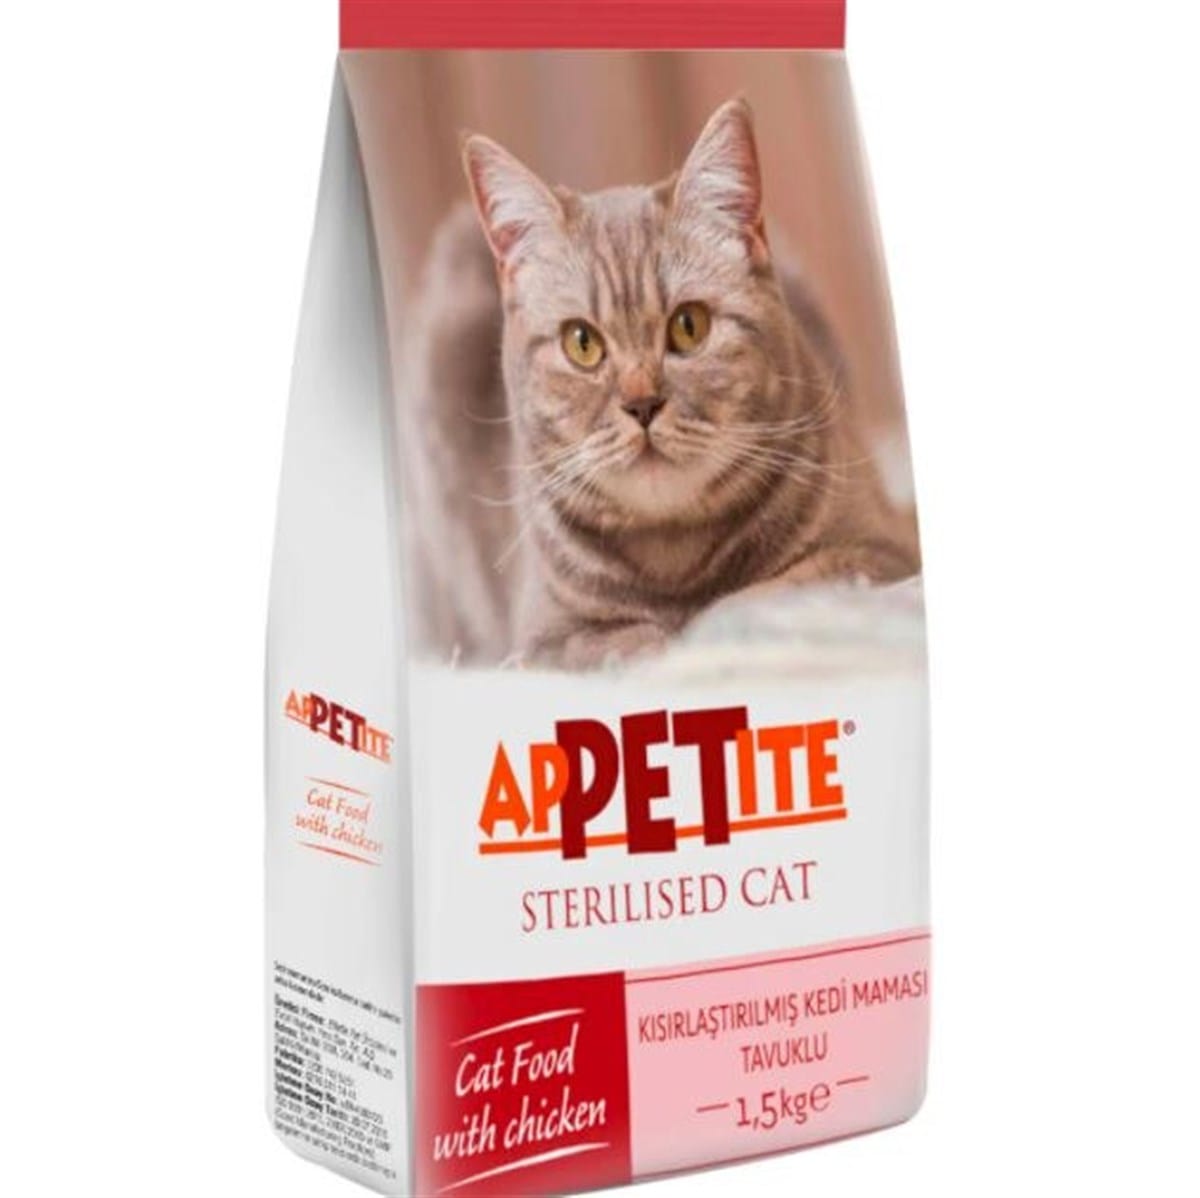 APPETITE STERILIZED CAT WITH CHICKEN 1.5KG